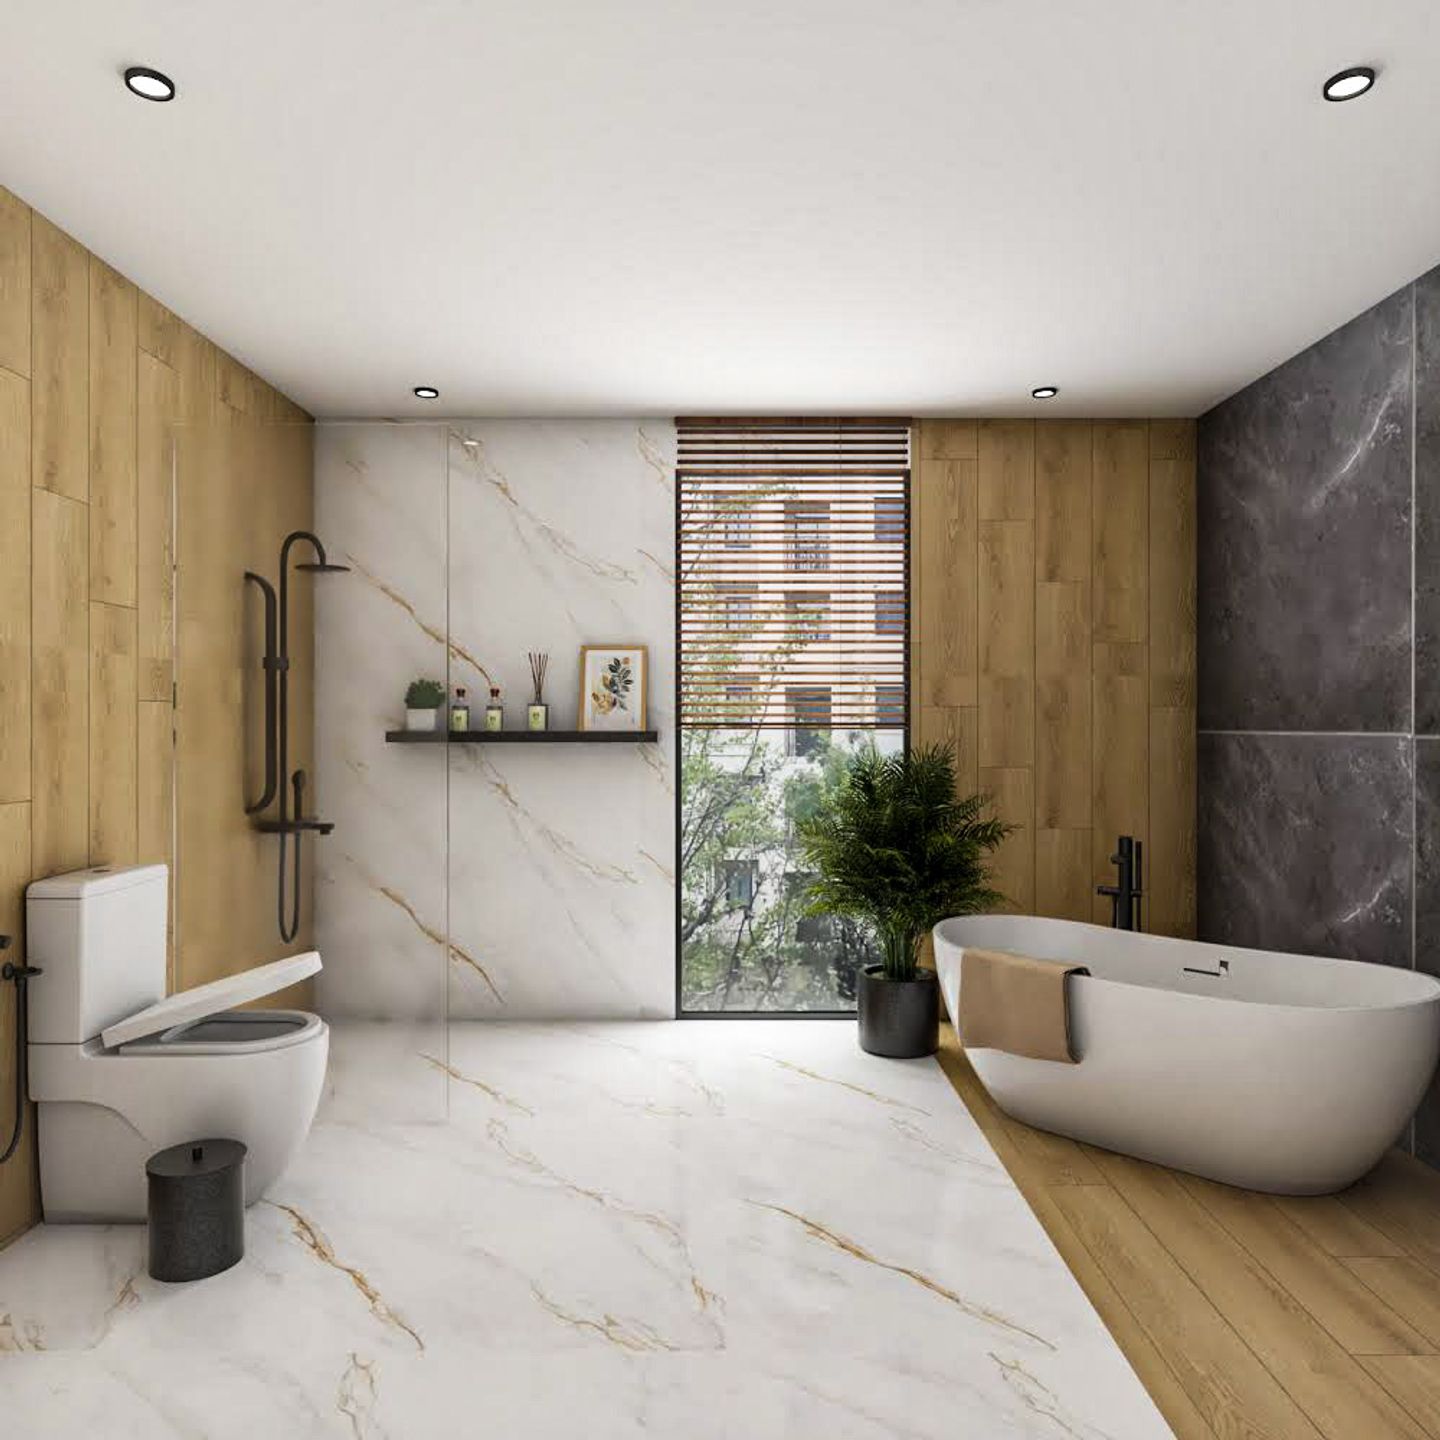 Bathroom Design With White Baththub And Wooden Wall Panels - Livspace